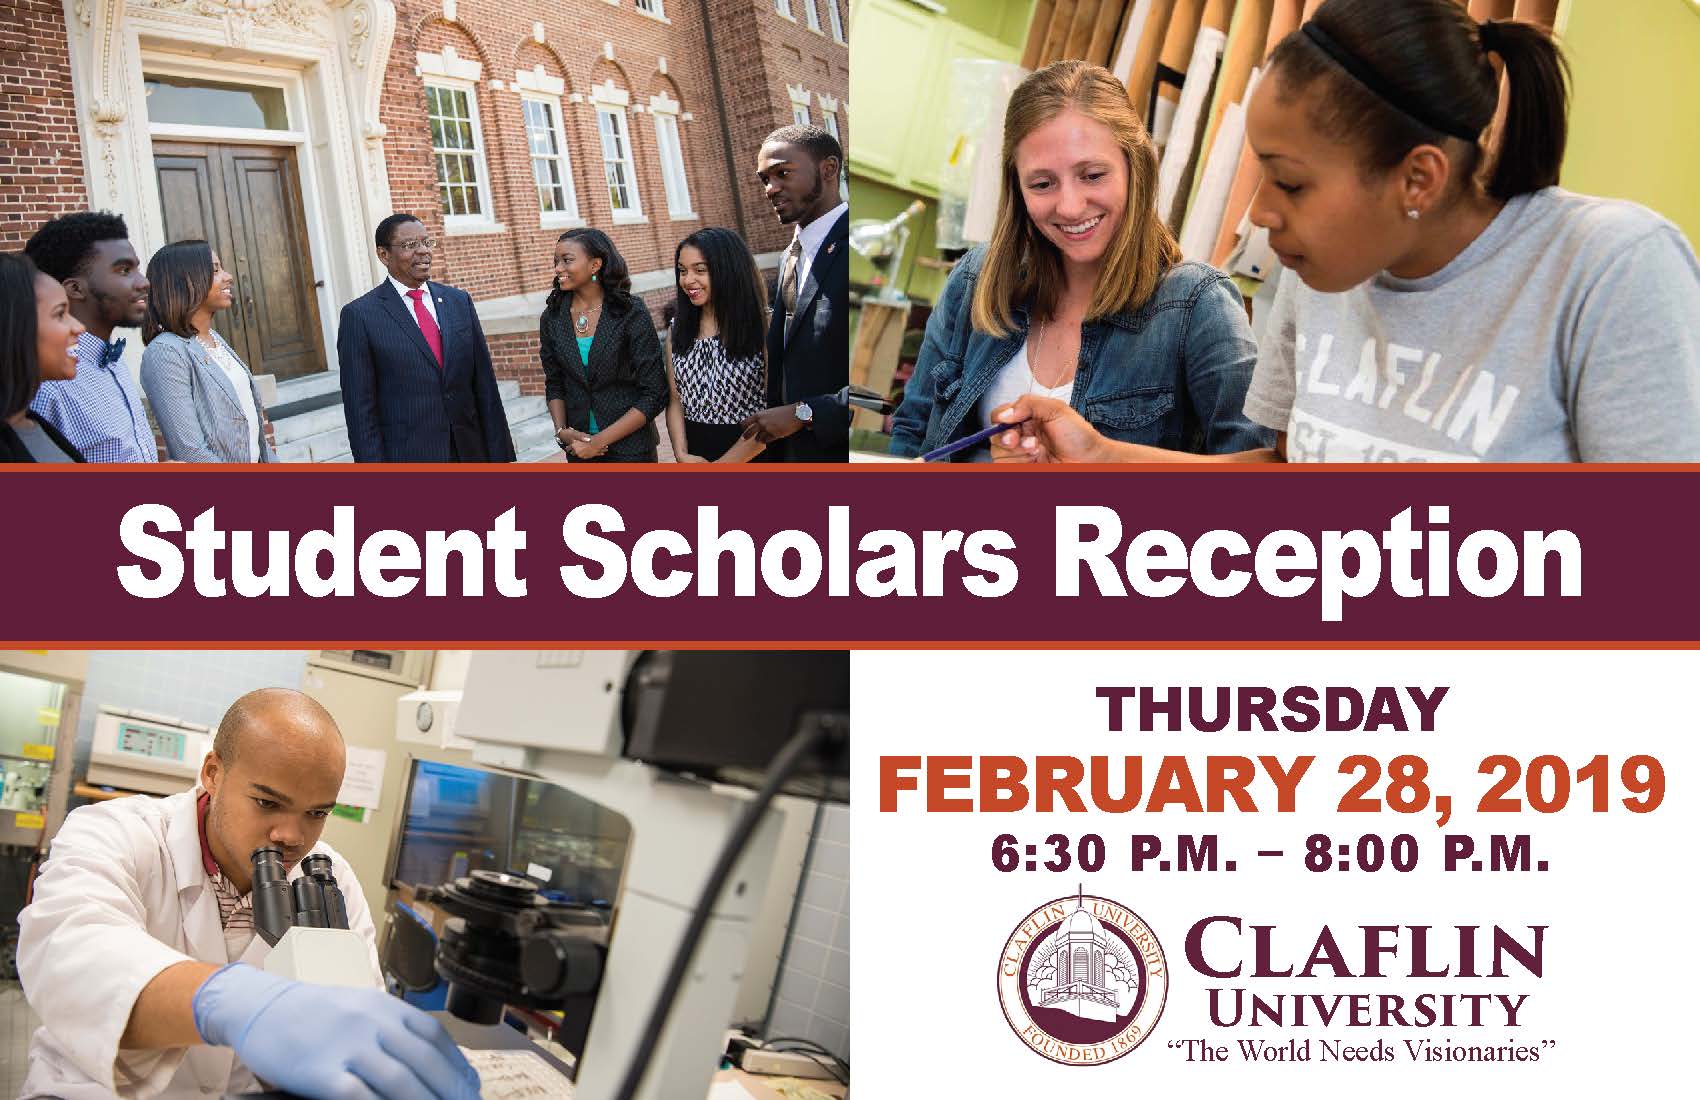 Student Scholars Reception Postcard - February 28, 2019 - Doubletree by Hilton Charlotte_Page_1